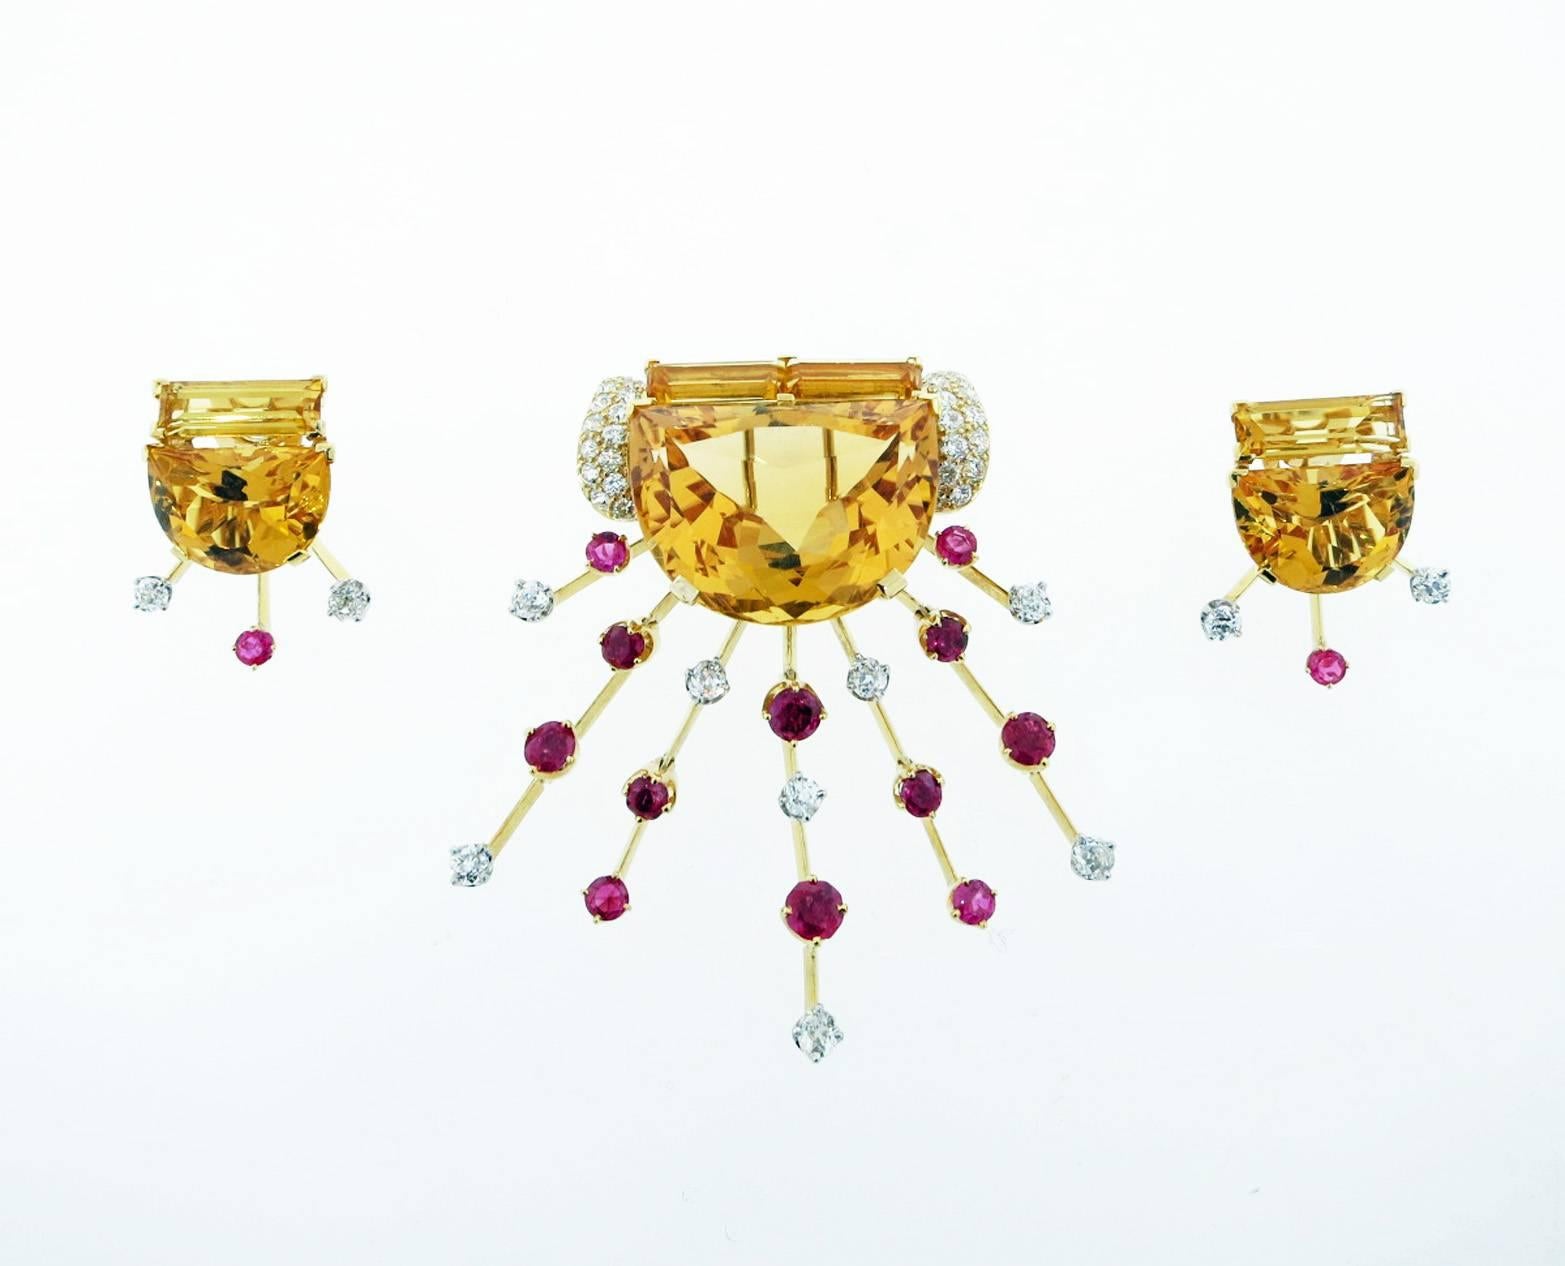 18kt. yellow gold brooch the center is set with a moon shape citrine weighing approx 70cts. topped with two baguette cut citrines flanked with half moons of pave set diamonds. Radiating down with articulated rays of round natural faceted rubies and